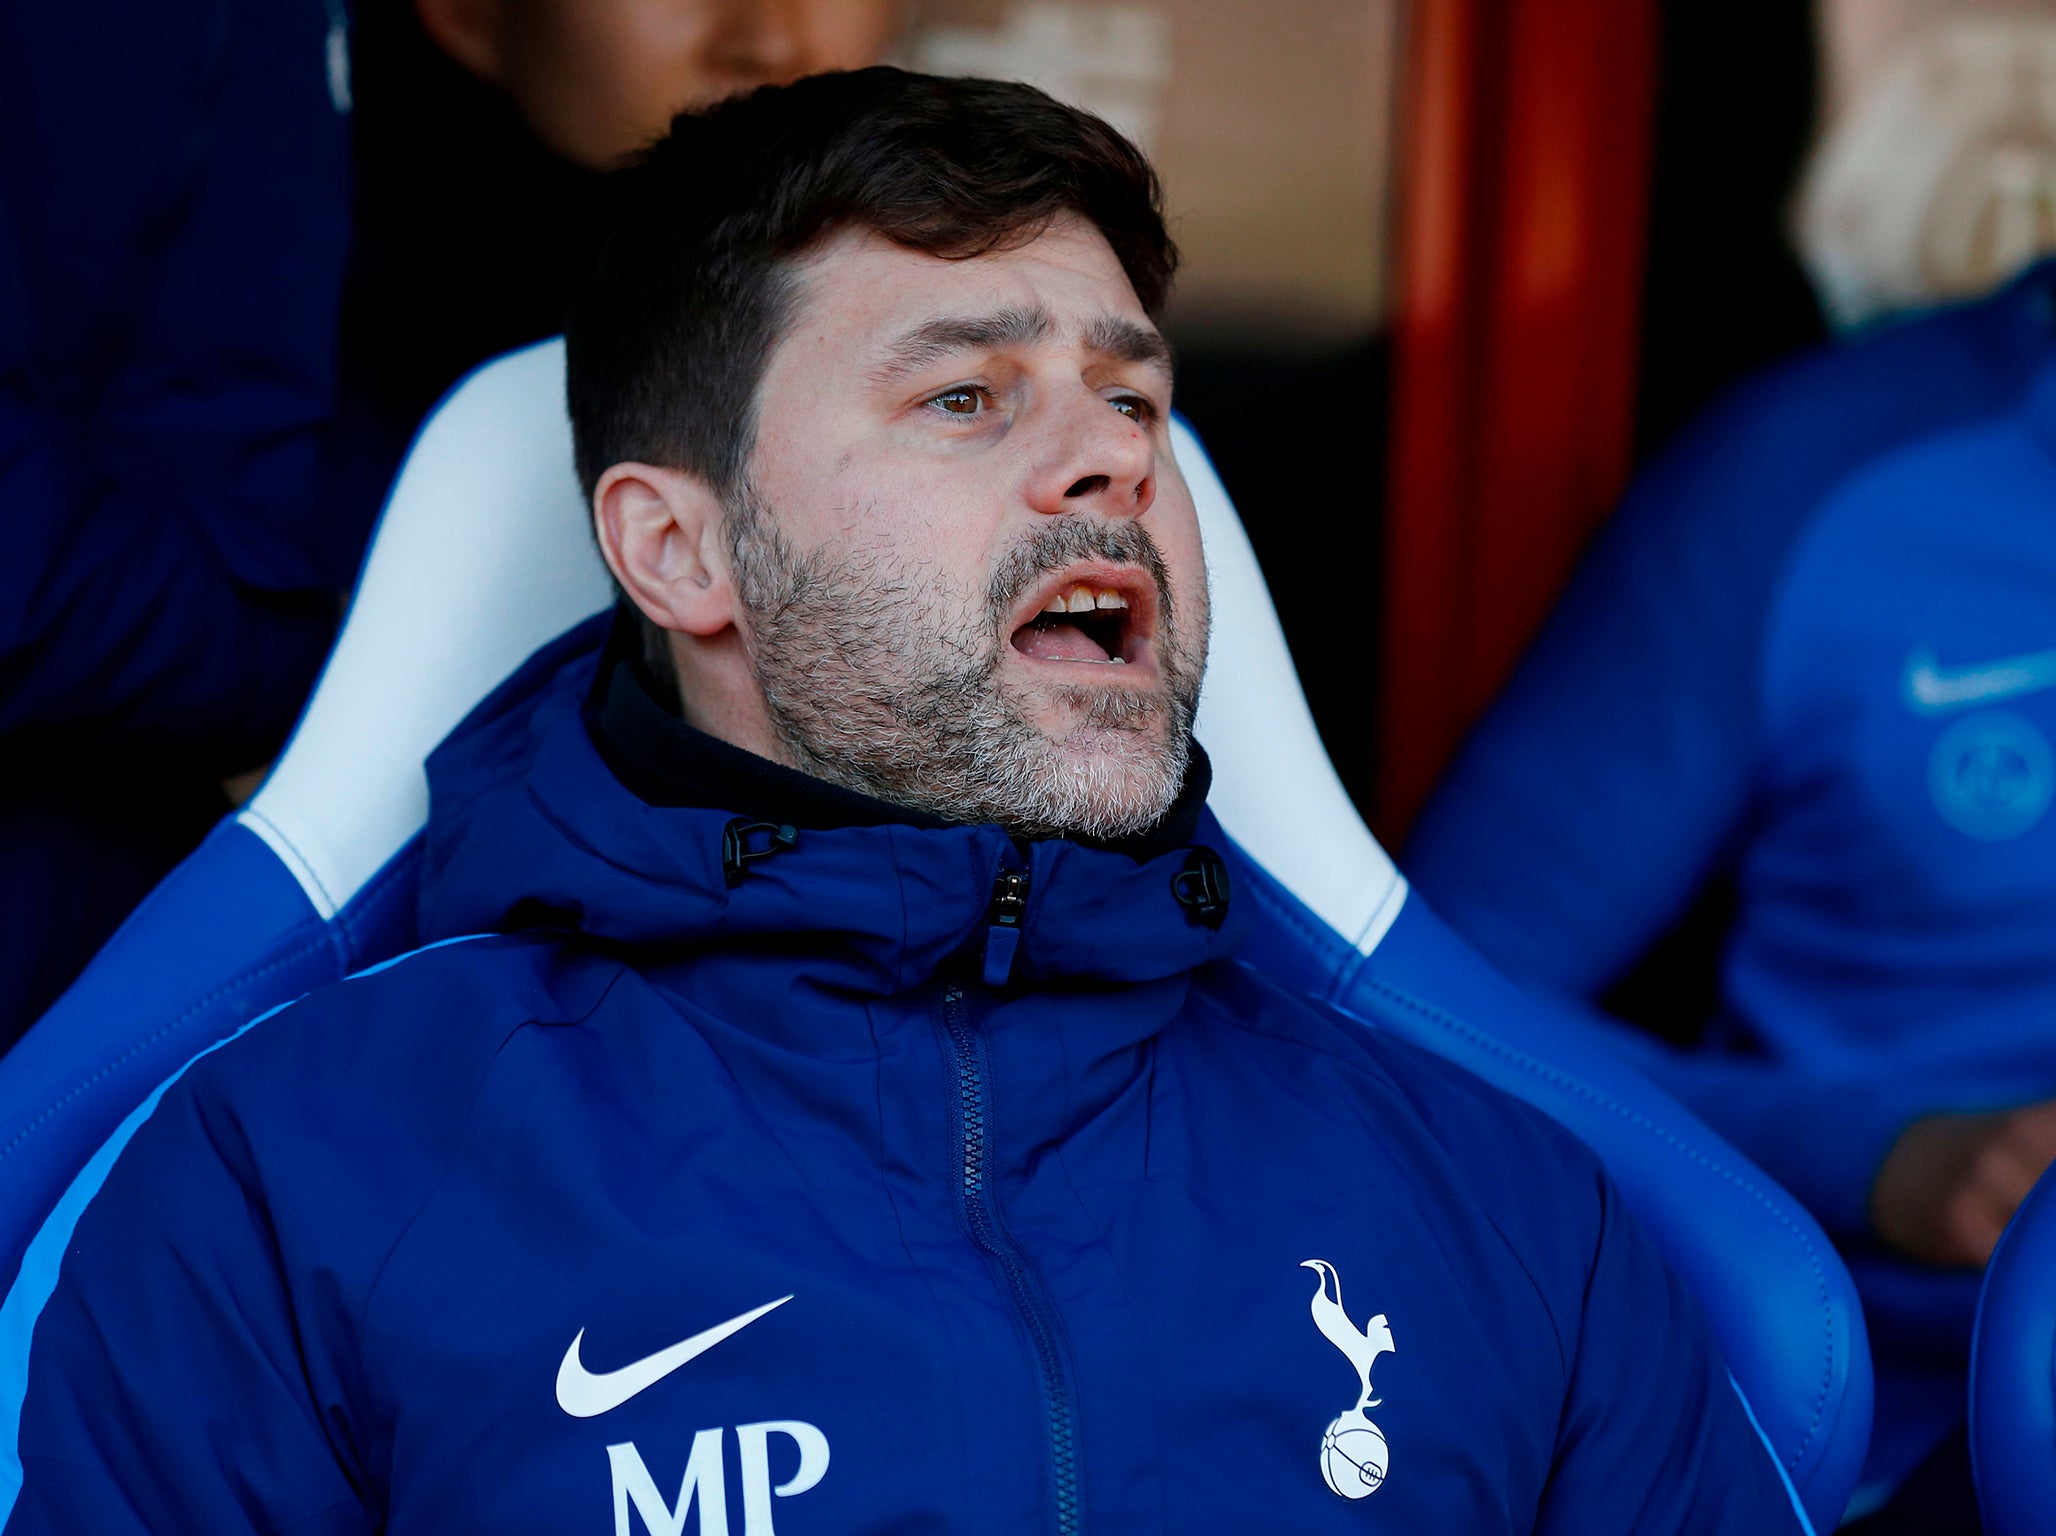 Pochettino defended his players